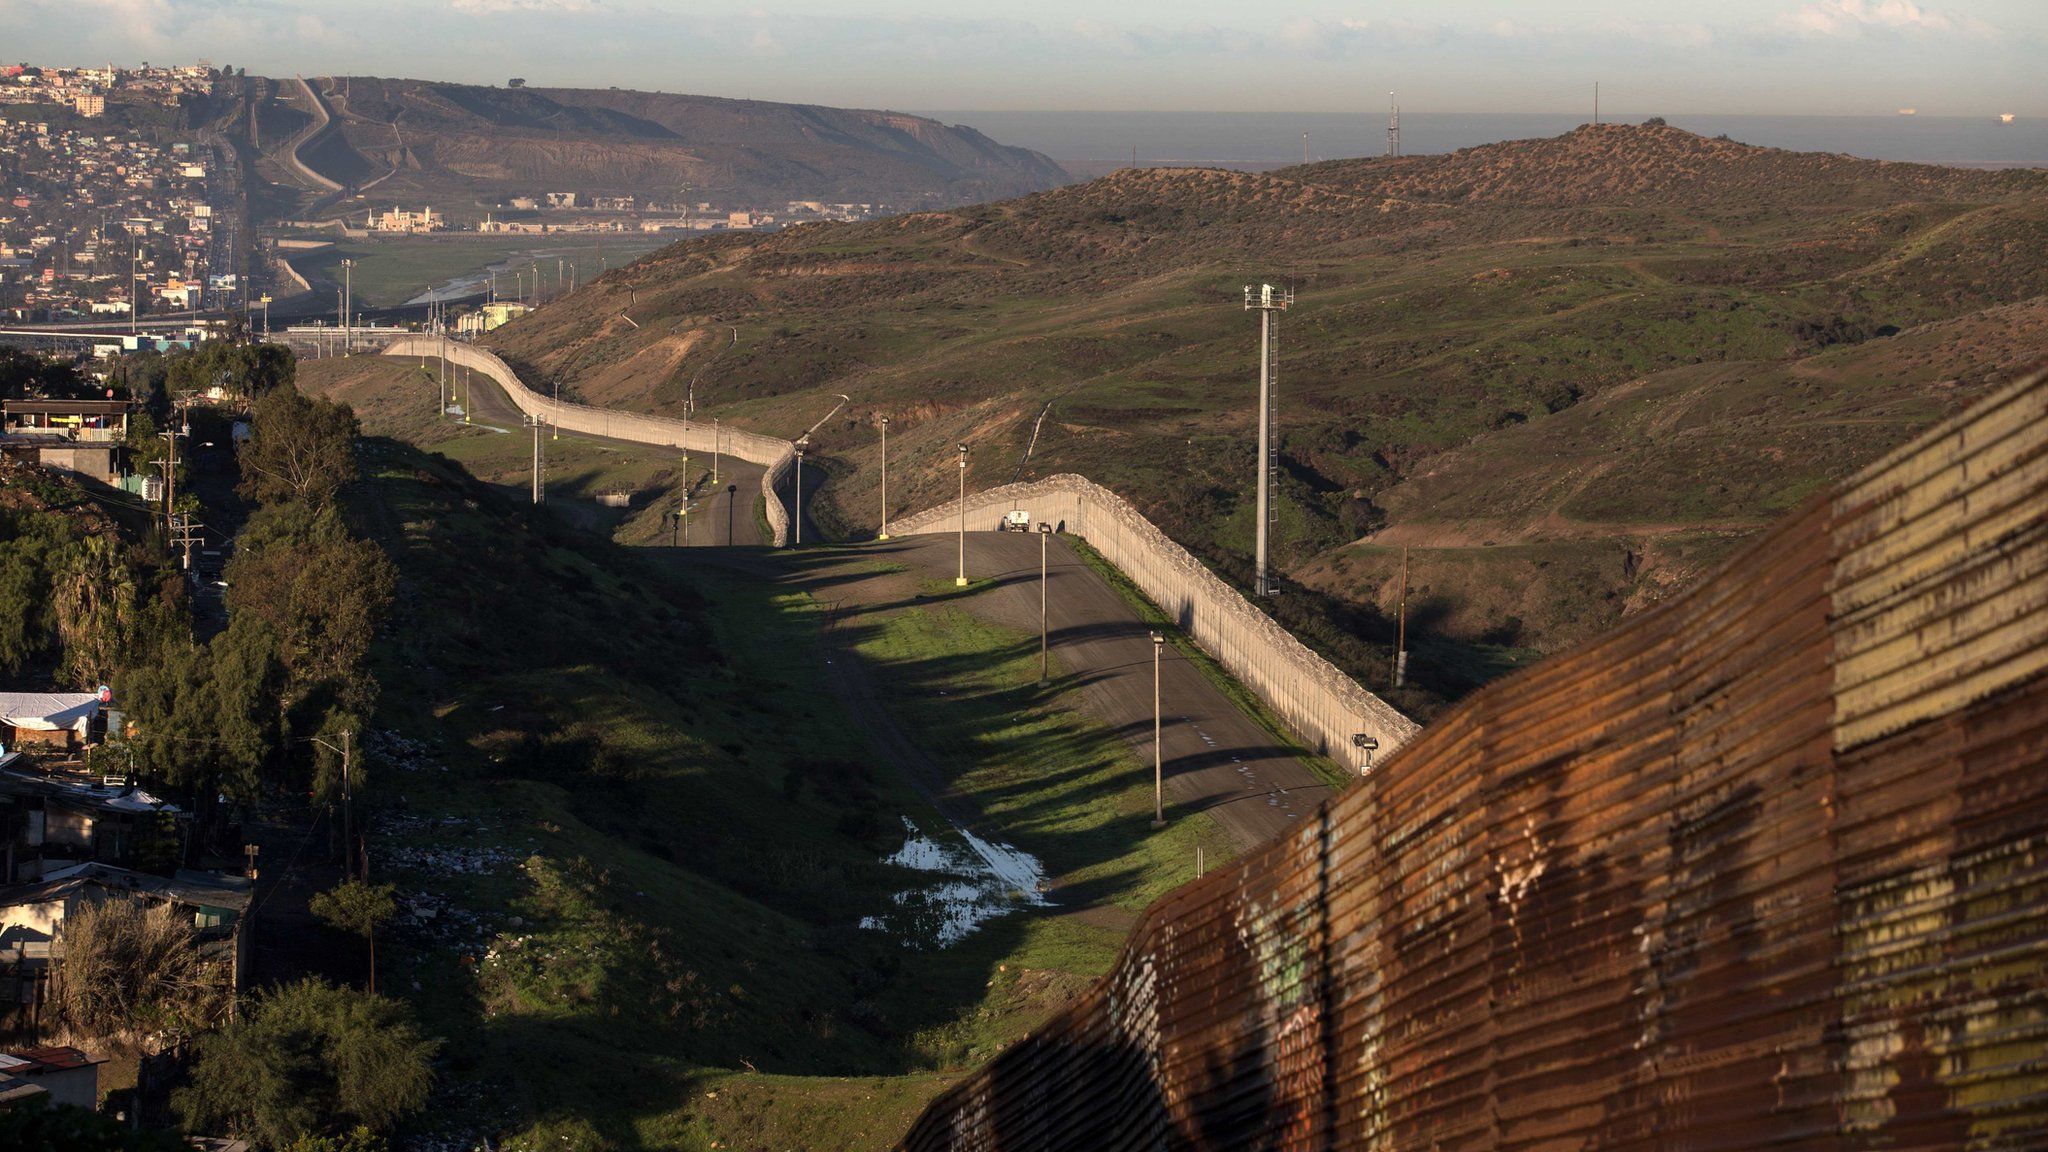 View of the border line between Mexico and the US in Tijuana